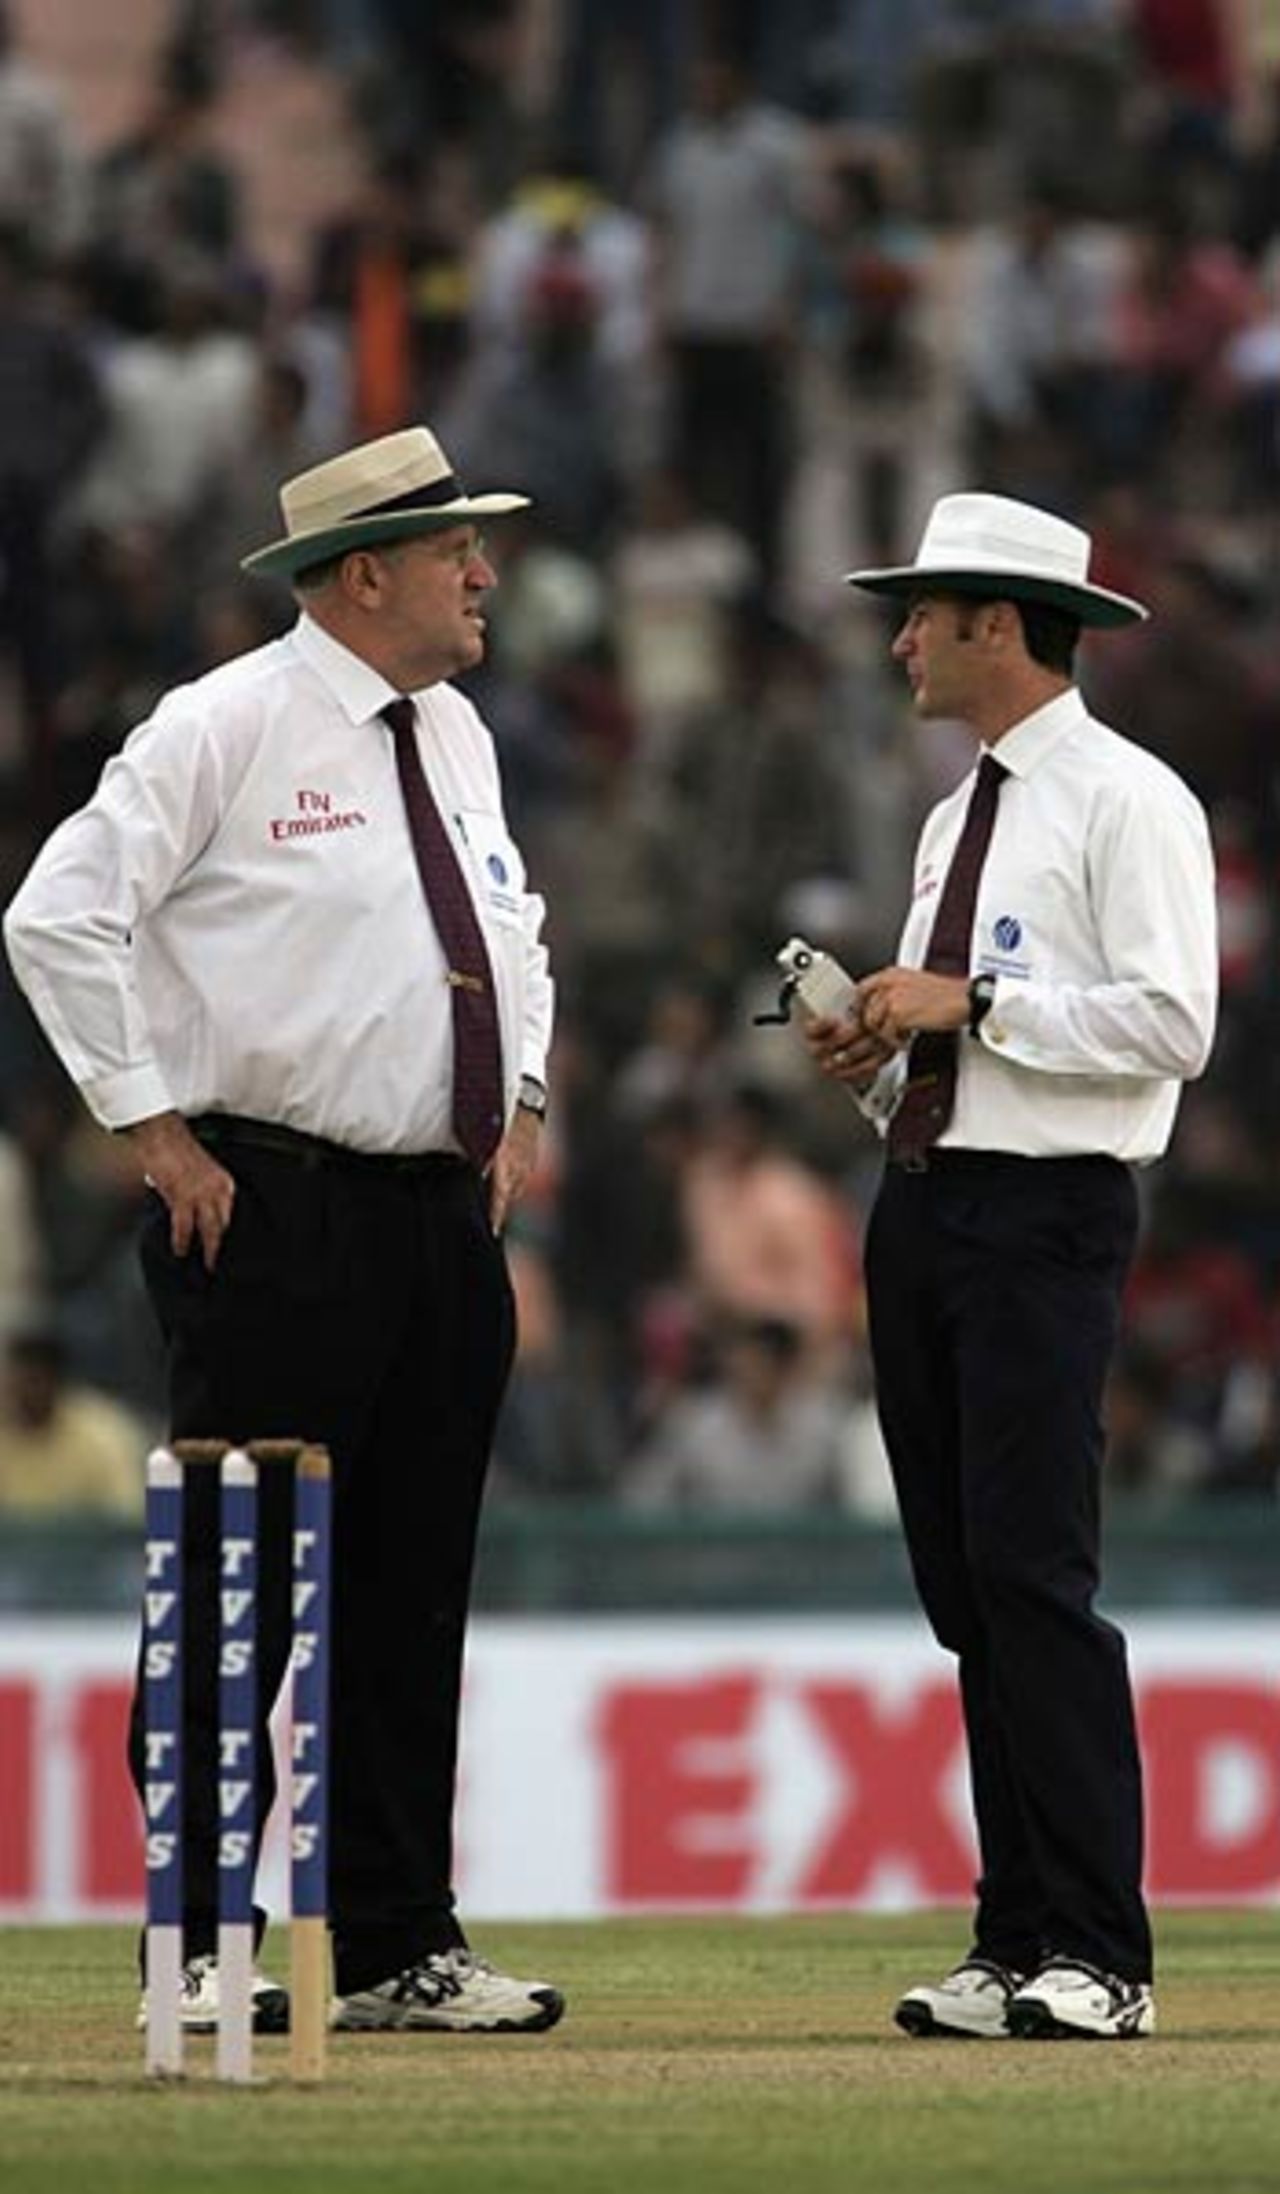 Umpires Darrell Hair and Simon Taufel have a talk about the light, India v England, 2nd Test, Mohali, 1st day, March 9, 2006 